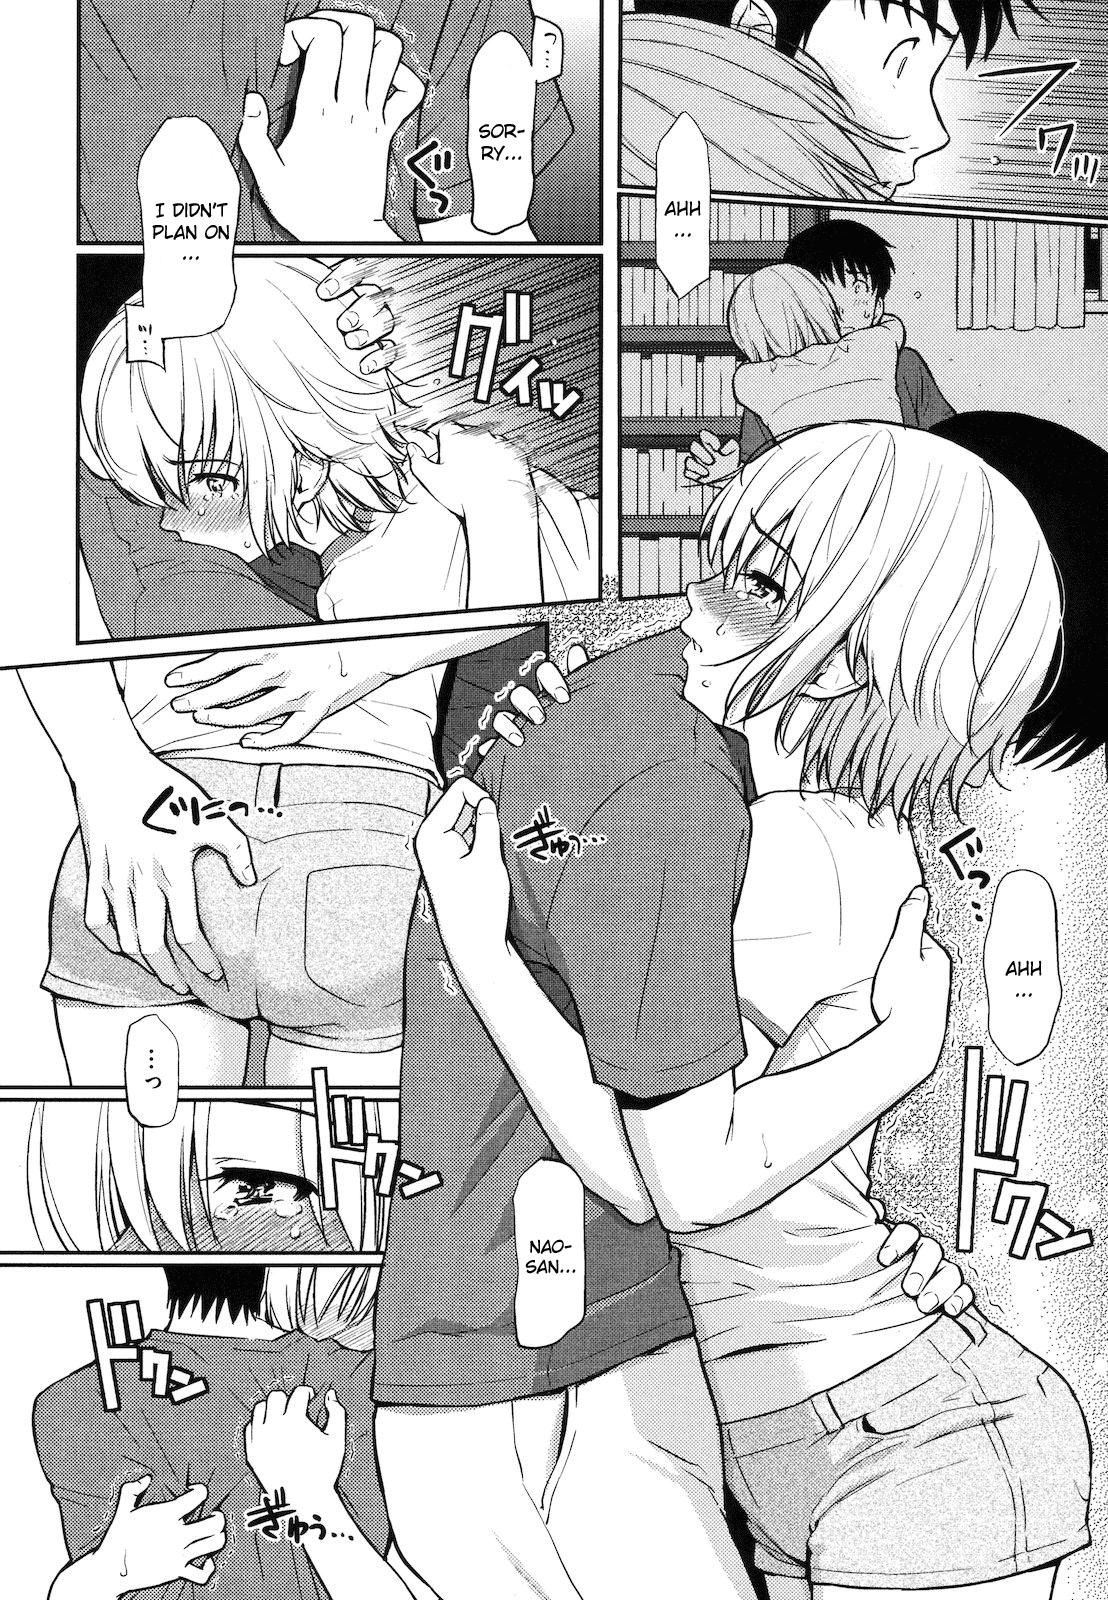 Home-mate chapter 1&2 23